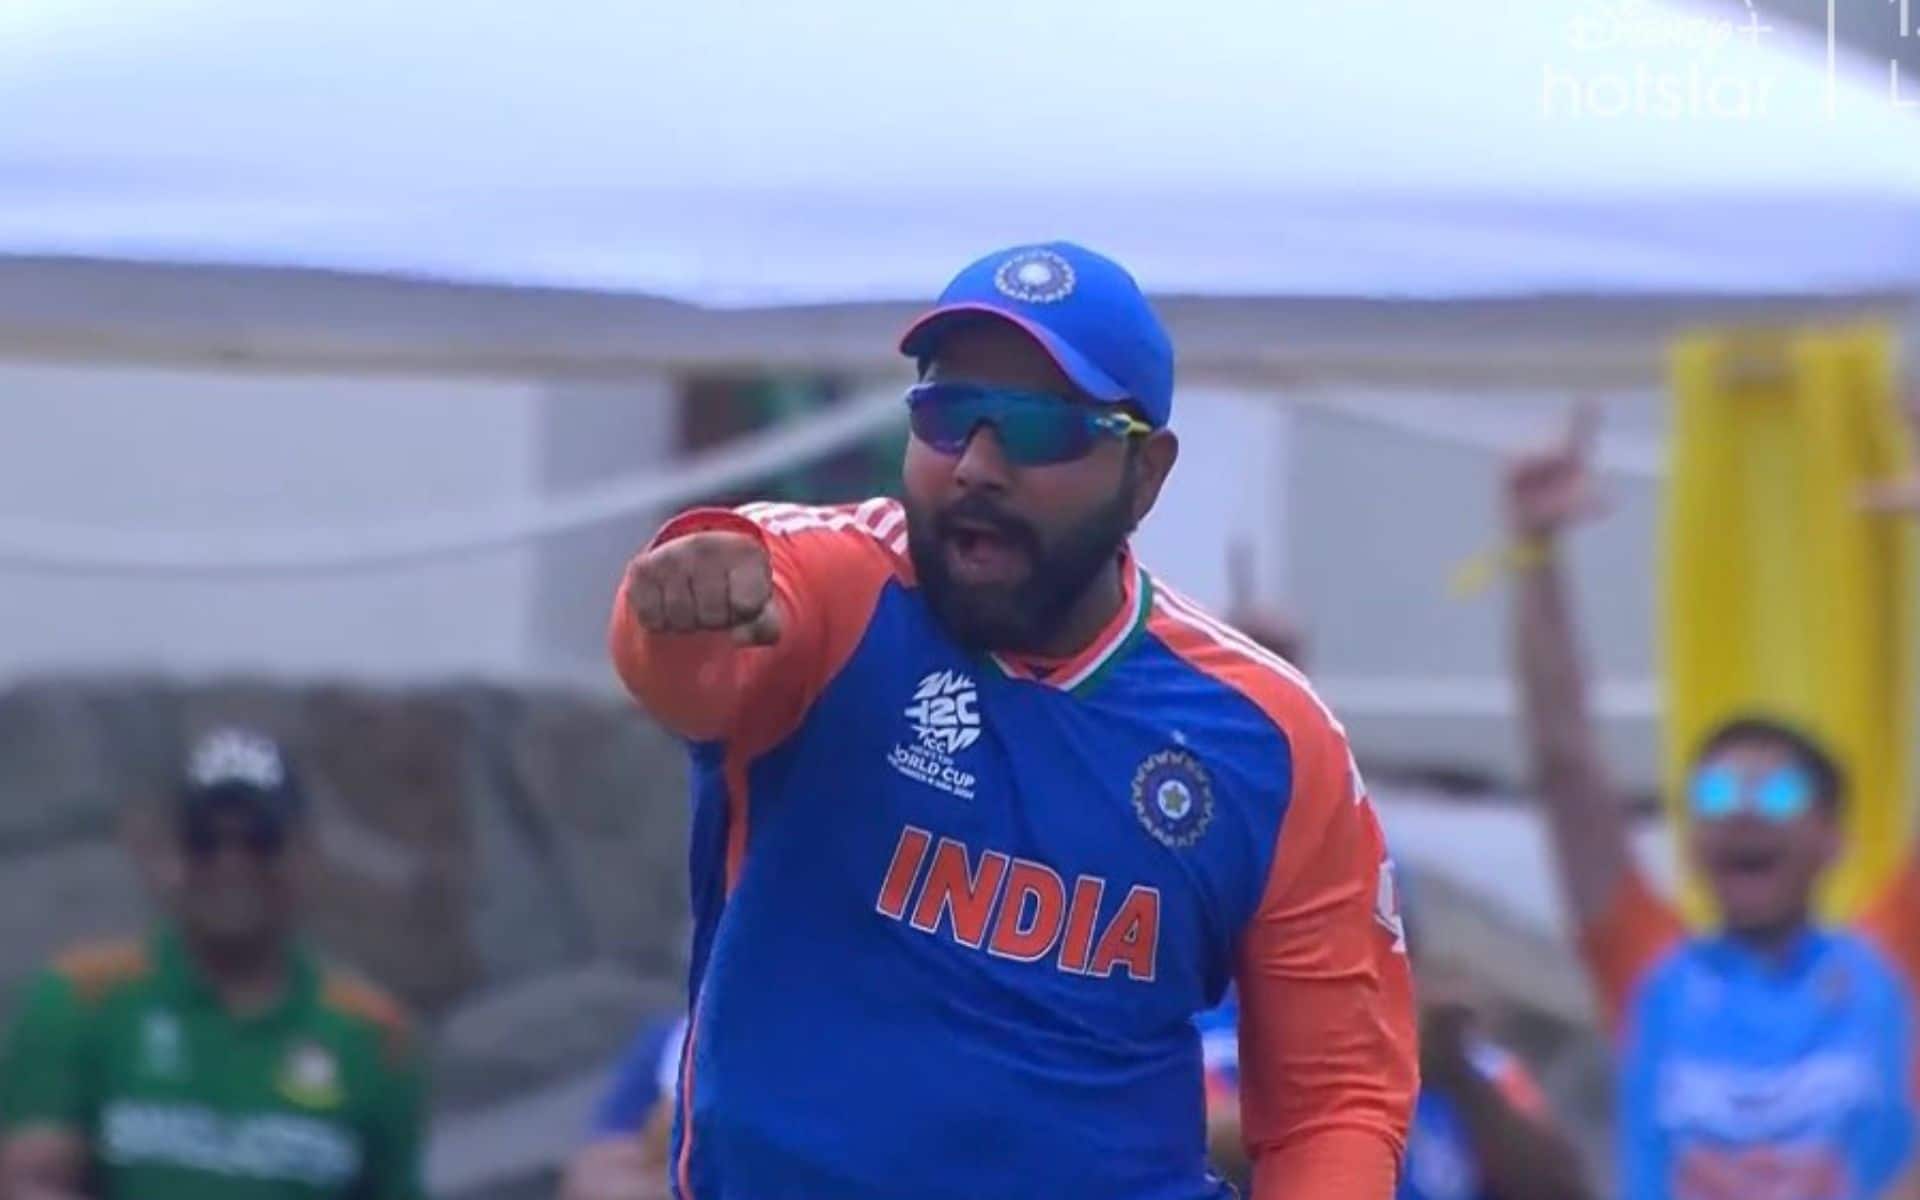 Rohit Sharma was pumped up after Litton Das' wicket (X.com)